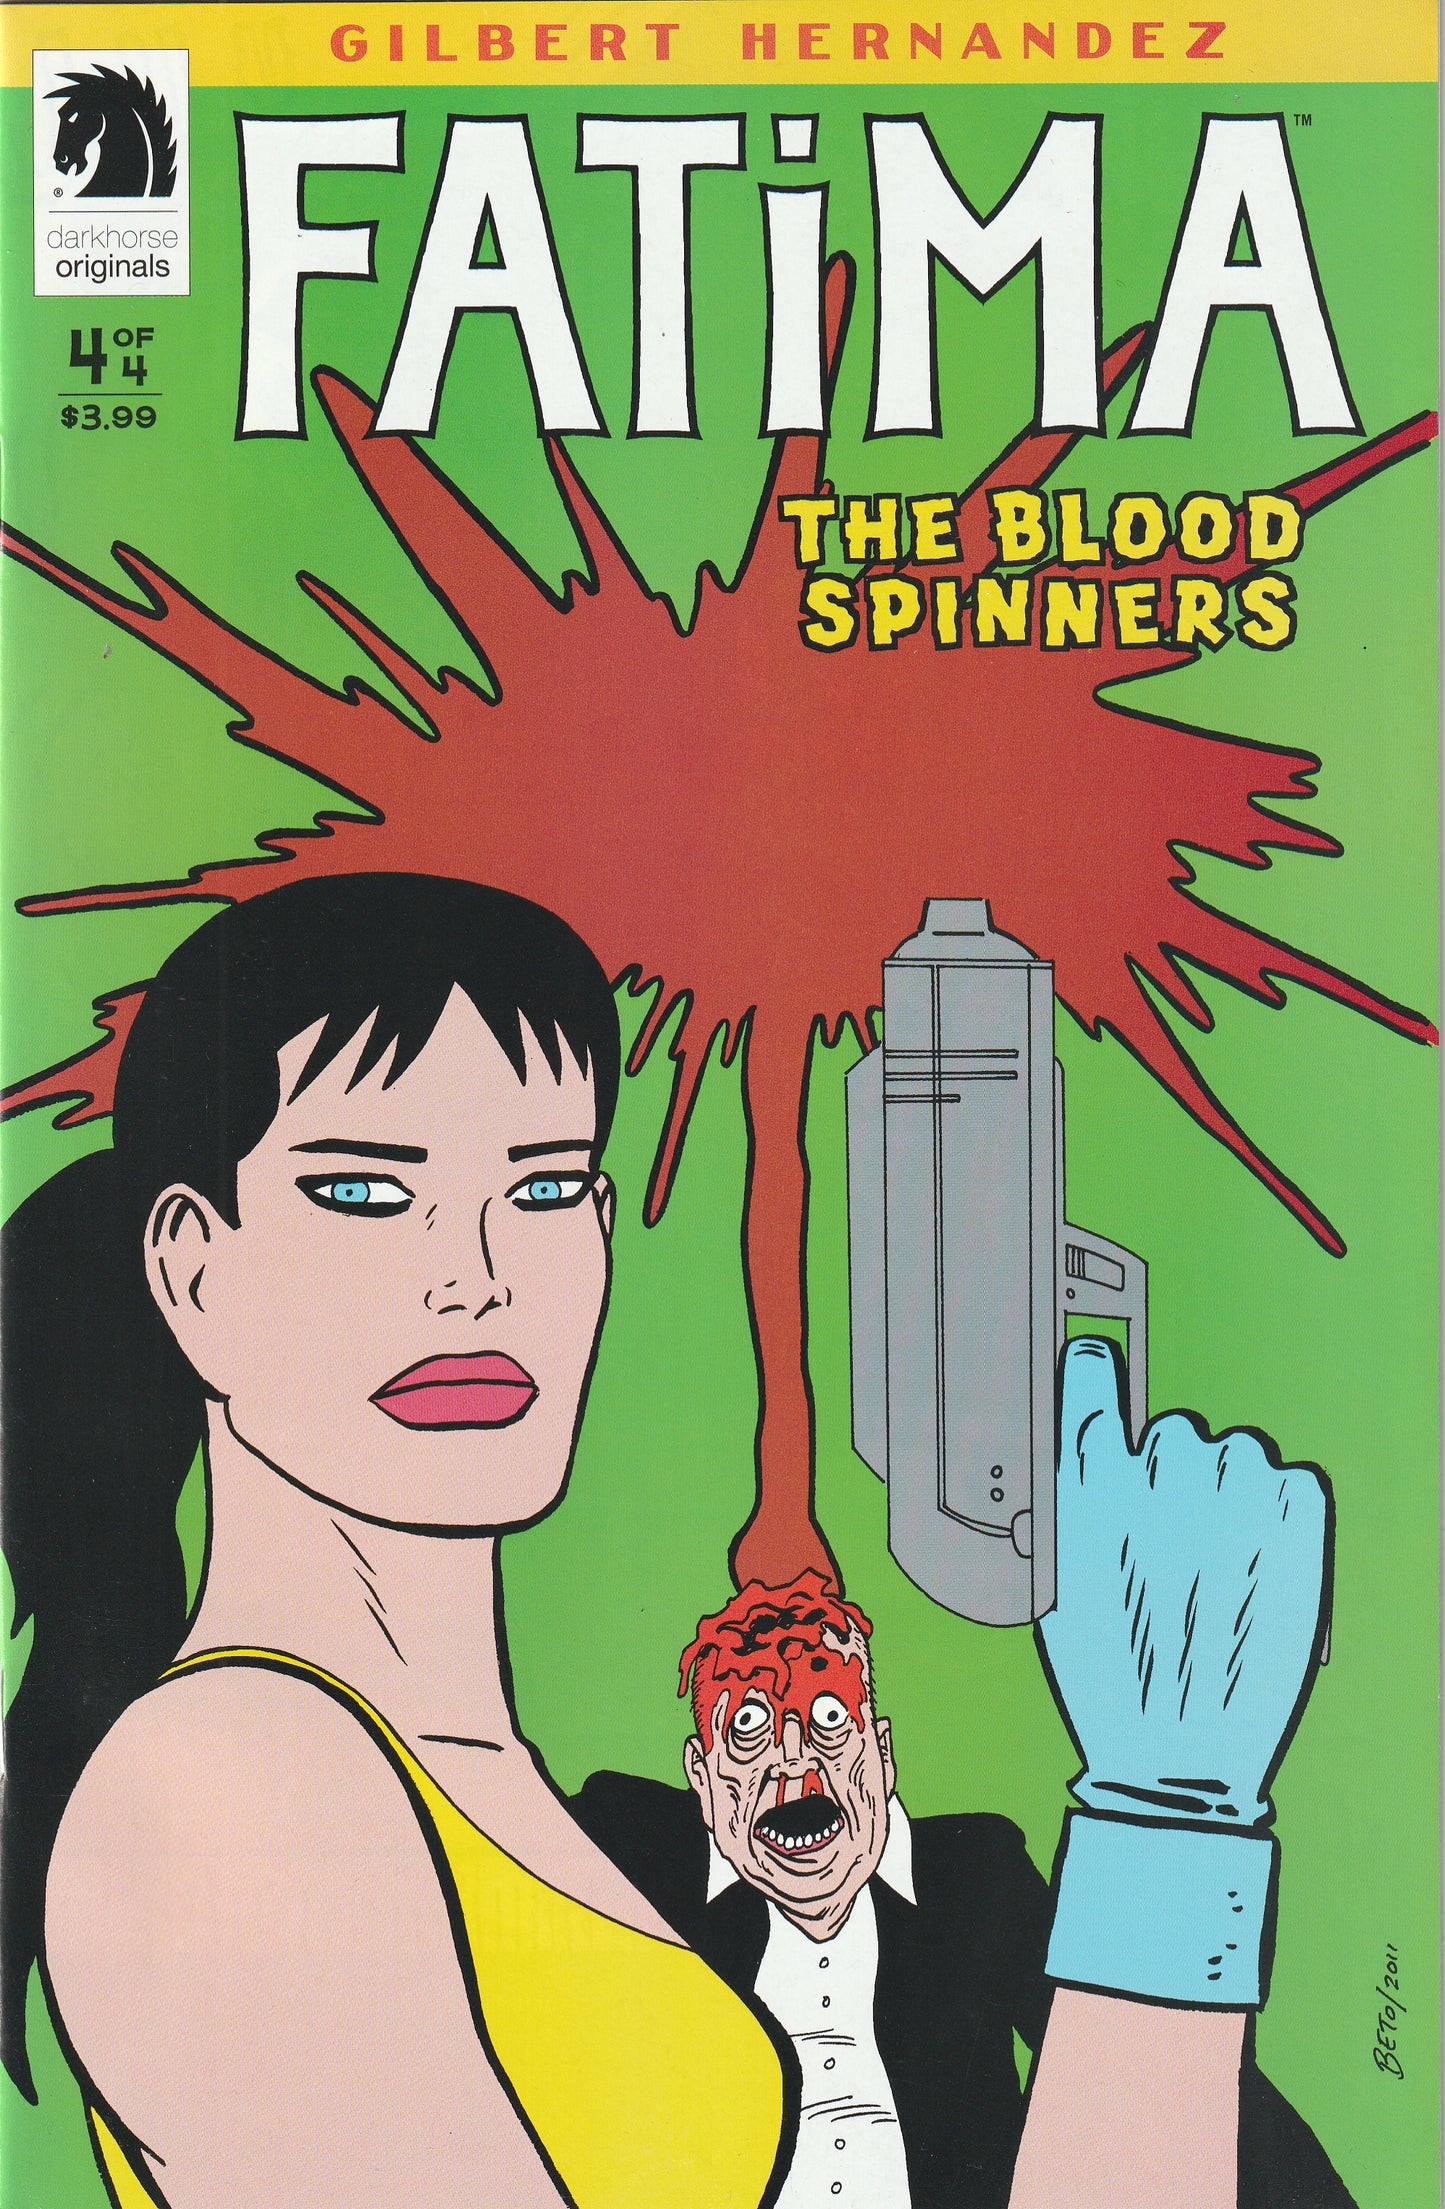 Fatima: The Blood Spinners (2012) - 4 issue mini series